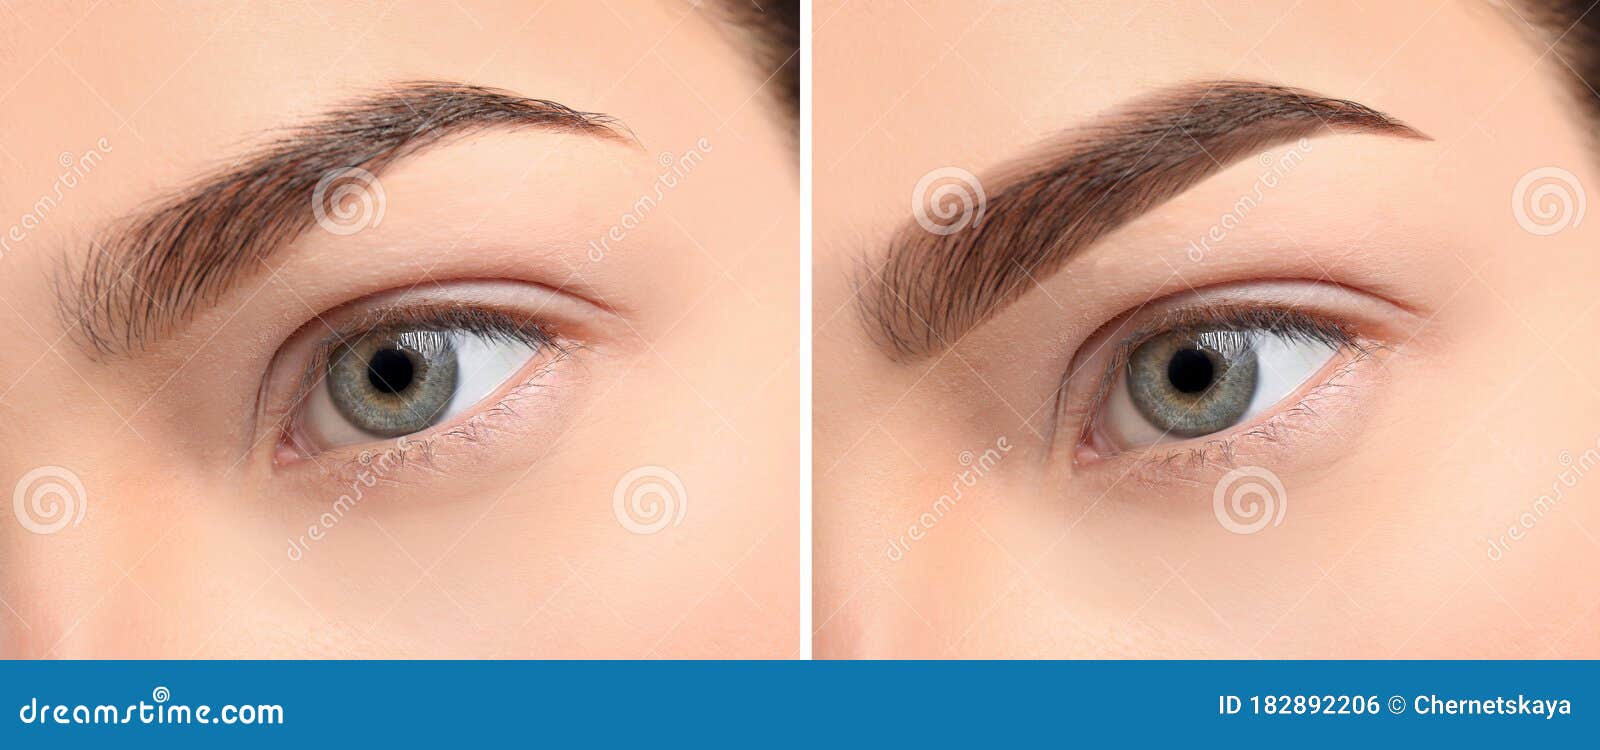 woman before and after eyebrow correction. banner 